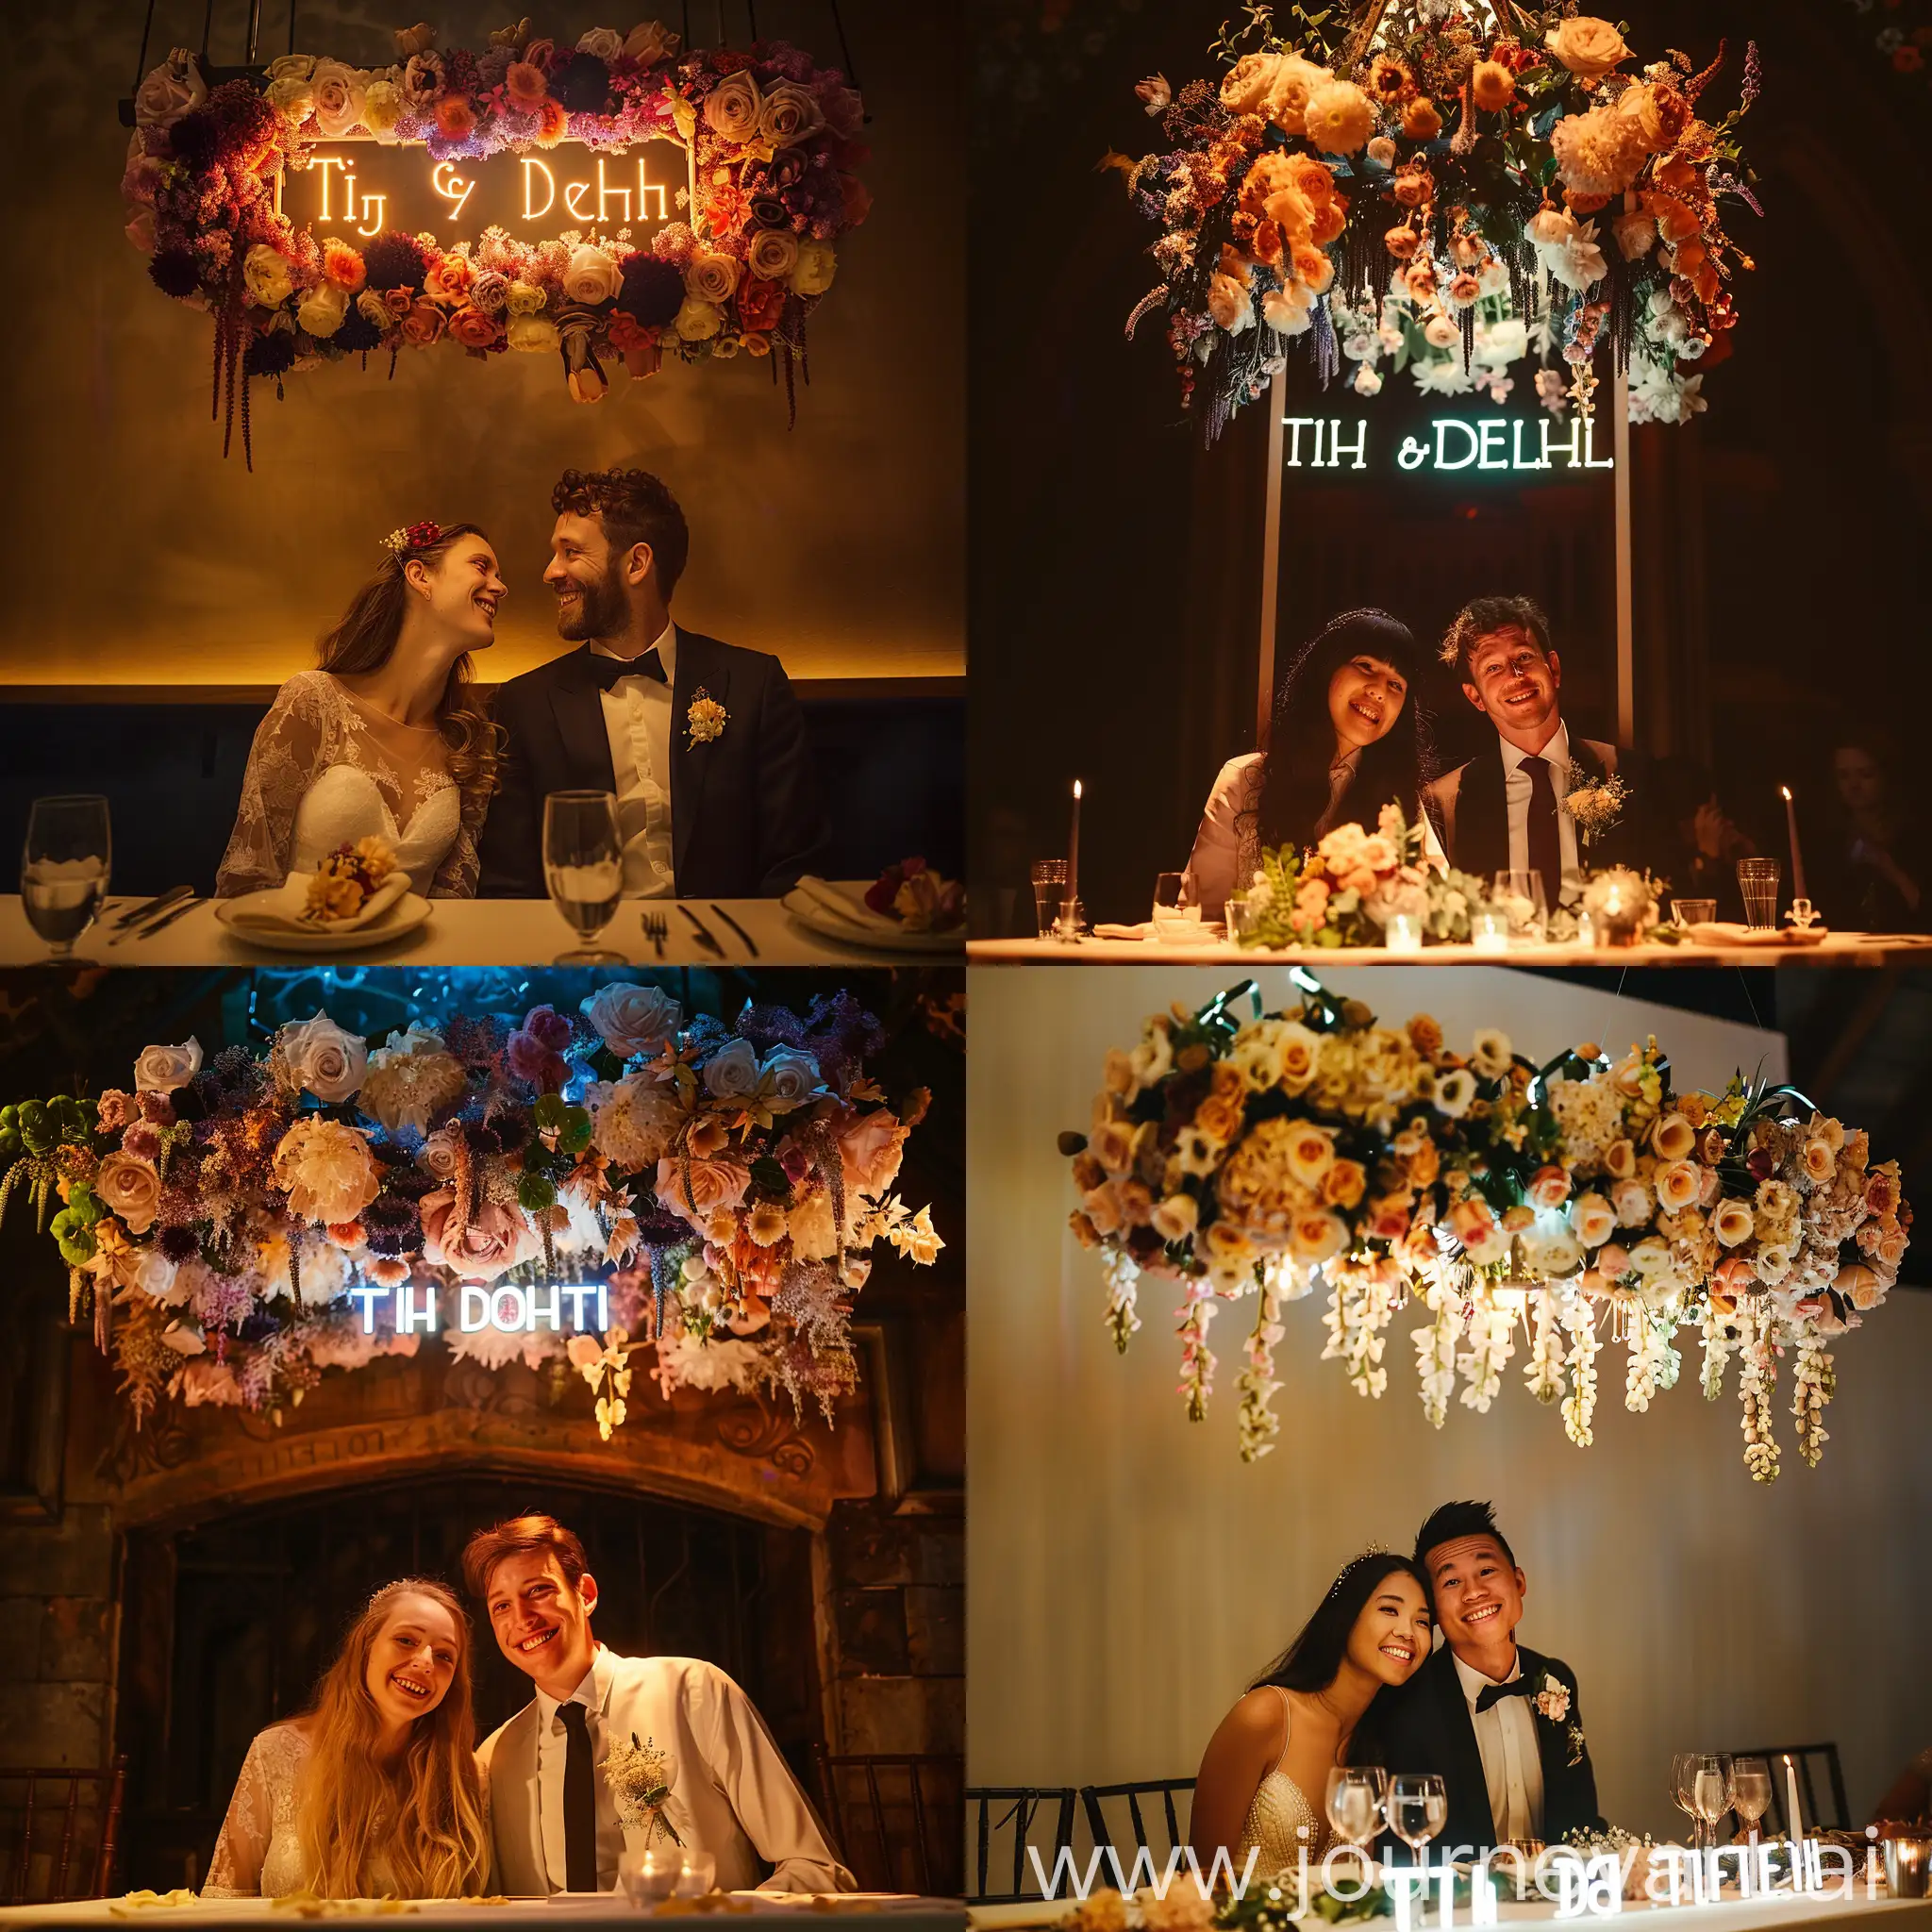 Generate a wedding hall in a Gothic style. The bride and groom are sitting at the table, smiling and clearly in love. Above them is a structure of flowers and a glowing inscription: 'Til death.